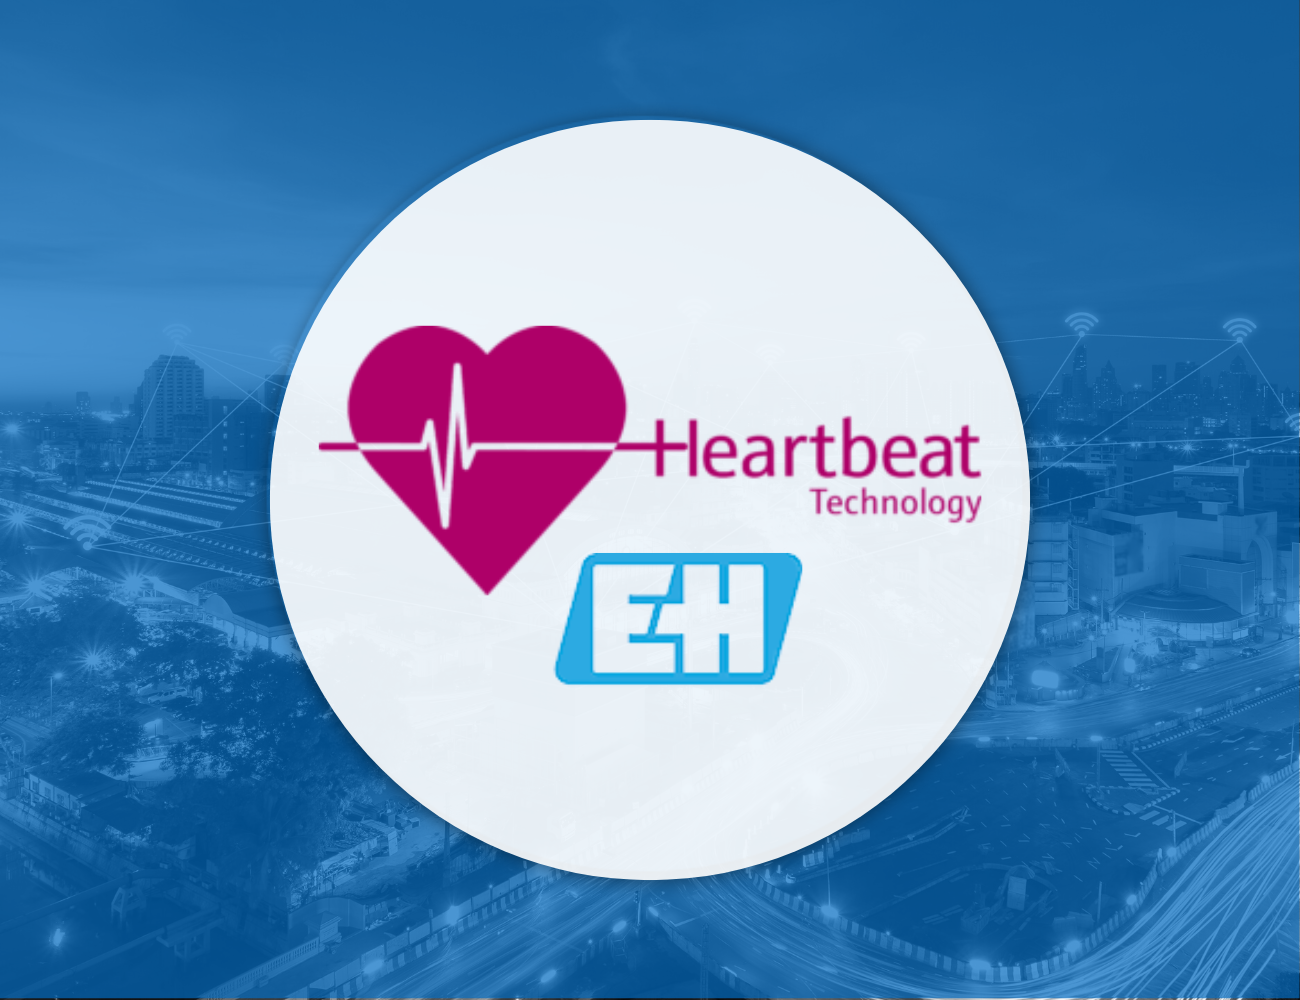 Header image with Endress+Hauser's logo and their Heartbeat Technology logo